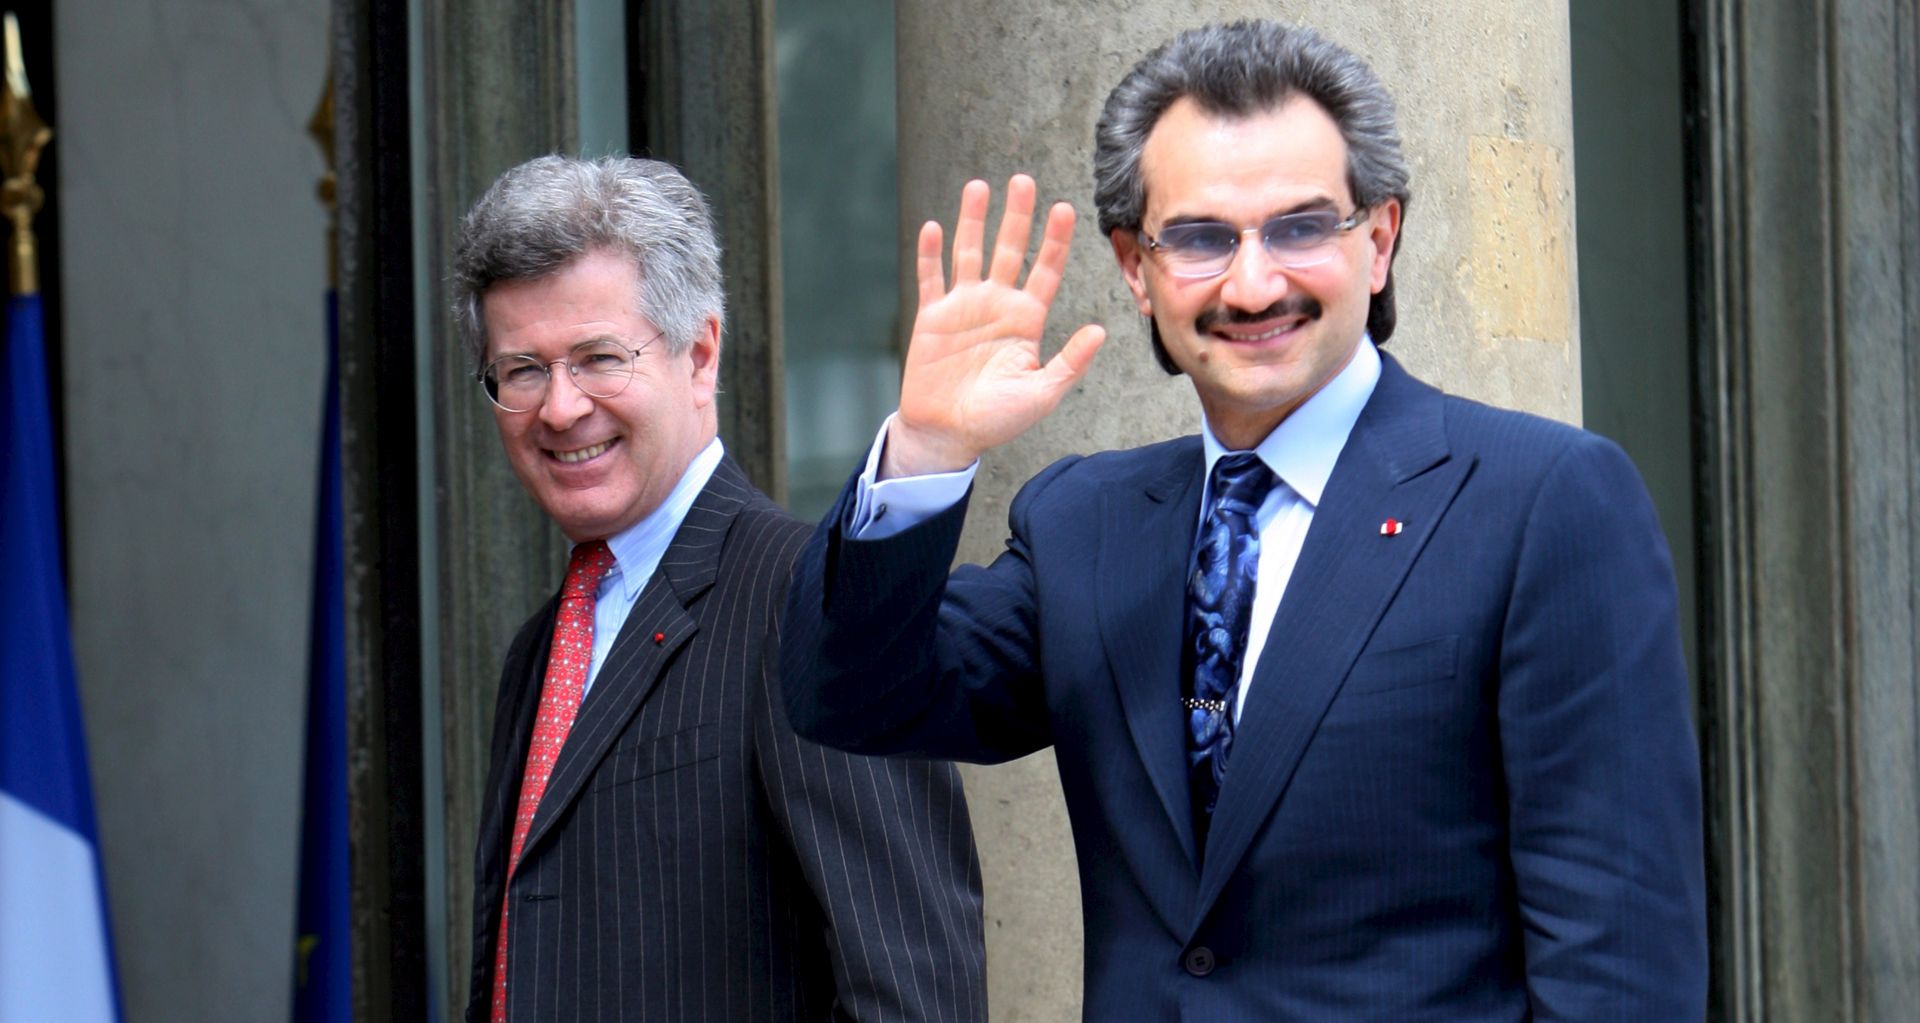 epa06309795 (FILE) - Prince Alwaleed Bin Talal Bin Abdulaziz Al Saud from Saudi Arabia (R) arrives with Diplomatic Councelor Jean David Levitte (L) at Elysee Palace, in Paris , France, 16 July 2008 (reissued 05 November 2017). According to reports Billionaire-prince Alwaleed Bin Talal is one of the eleven princes arrested on 04 November, along side four current ministers and tens of former ministers, in anti-corruption inquiry in Saudi Arabia.  EPA/LUCAS DOLEGA